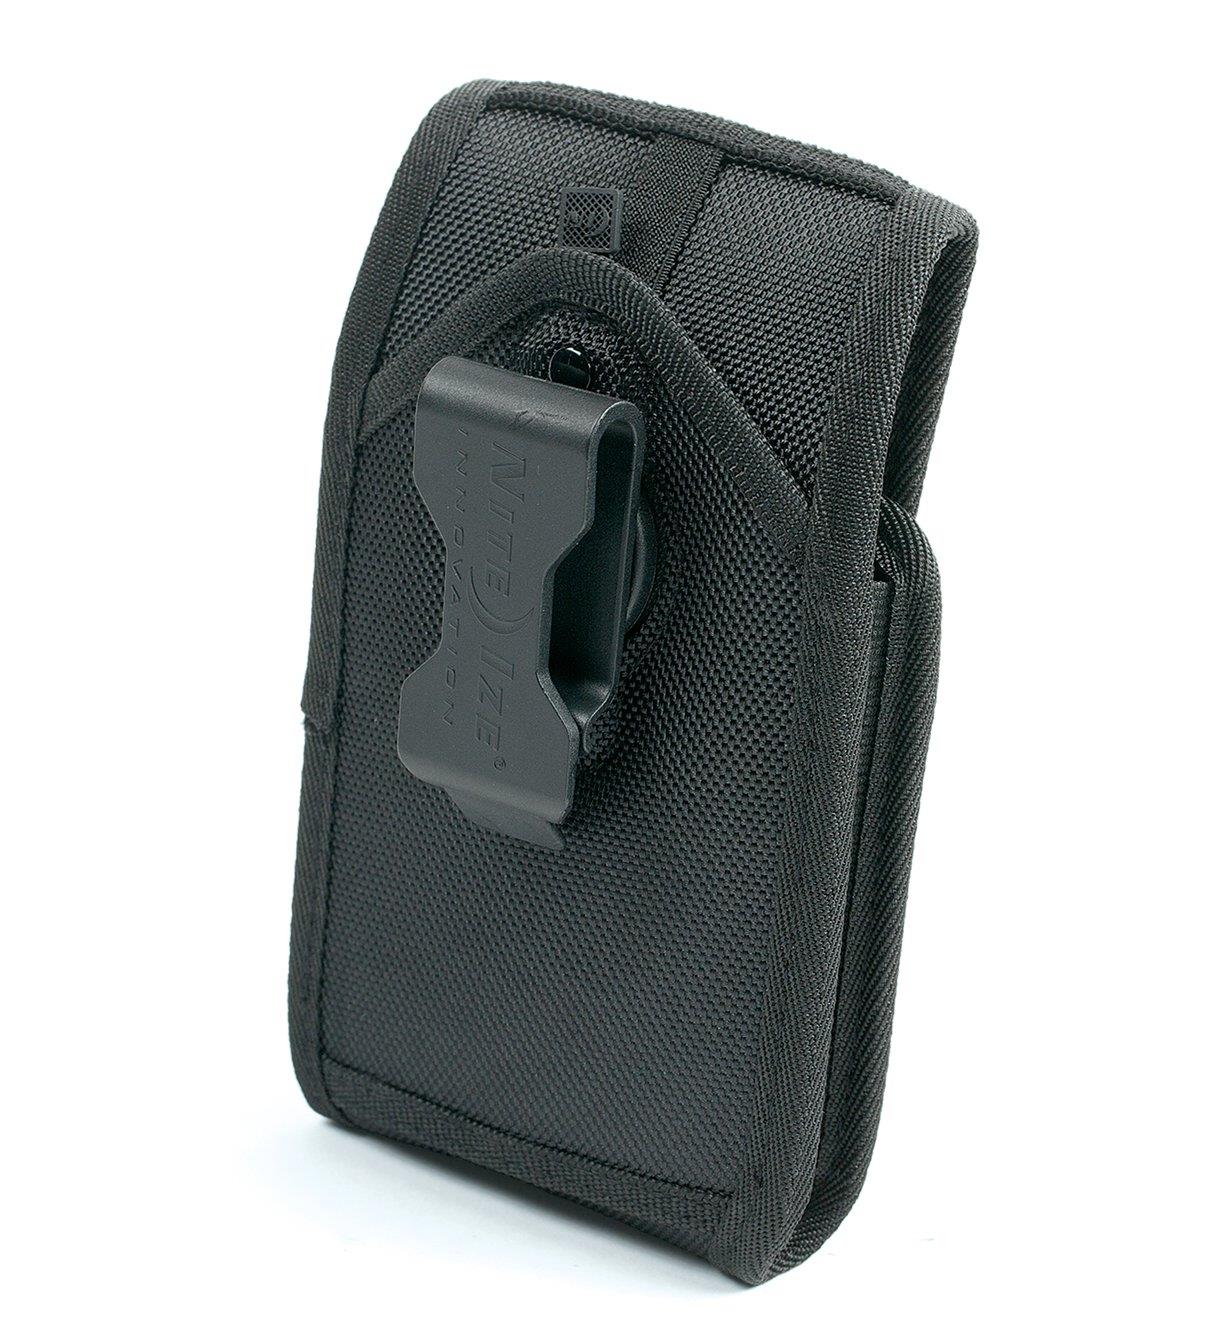 68K0636 - Large Smartphone Clip Case, Holster-Style